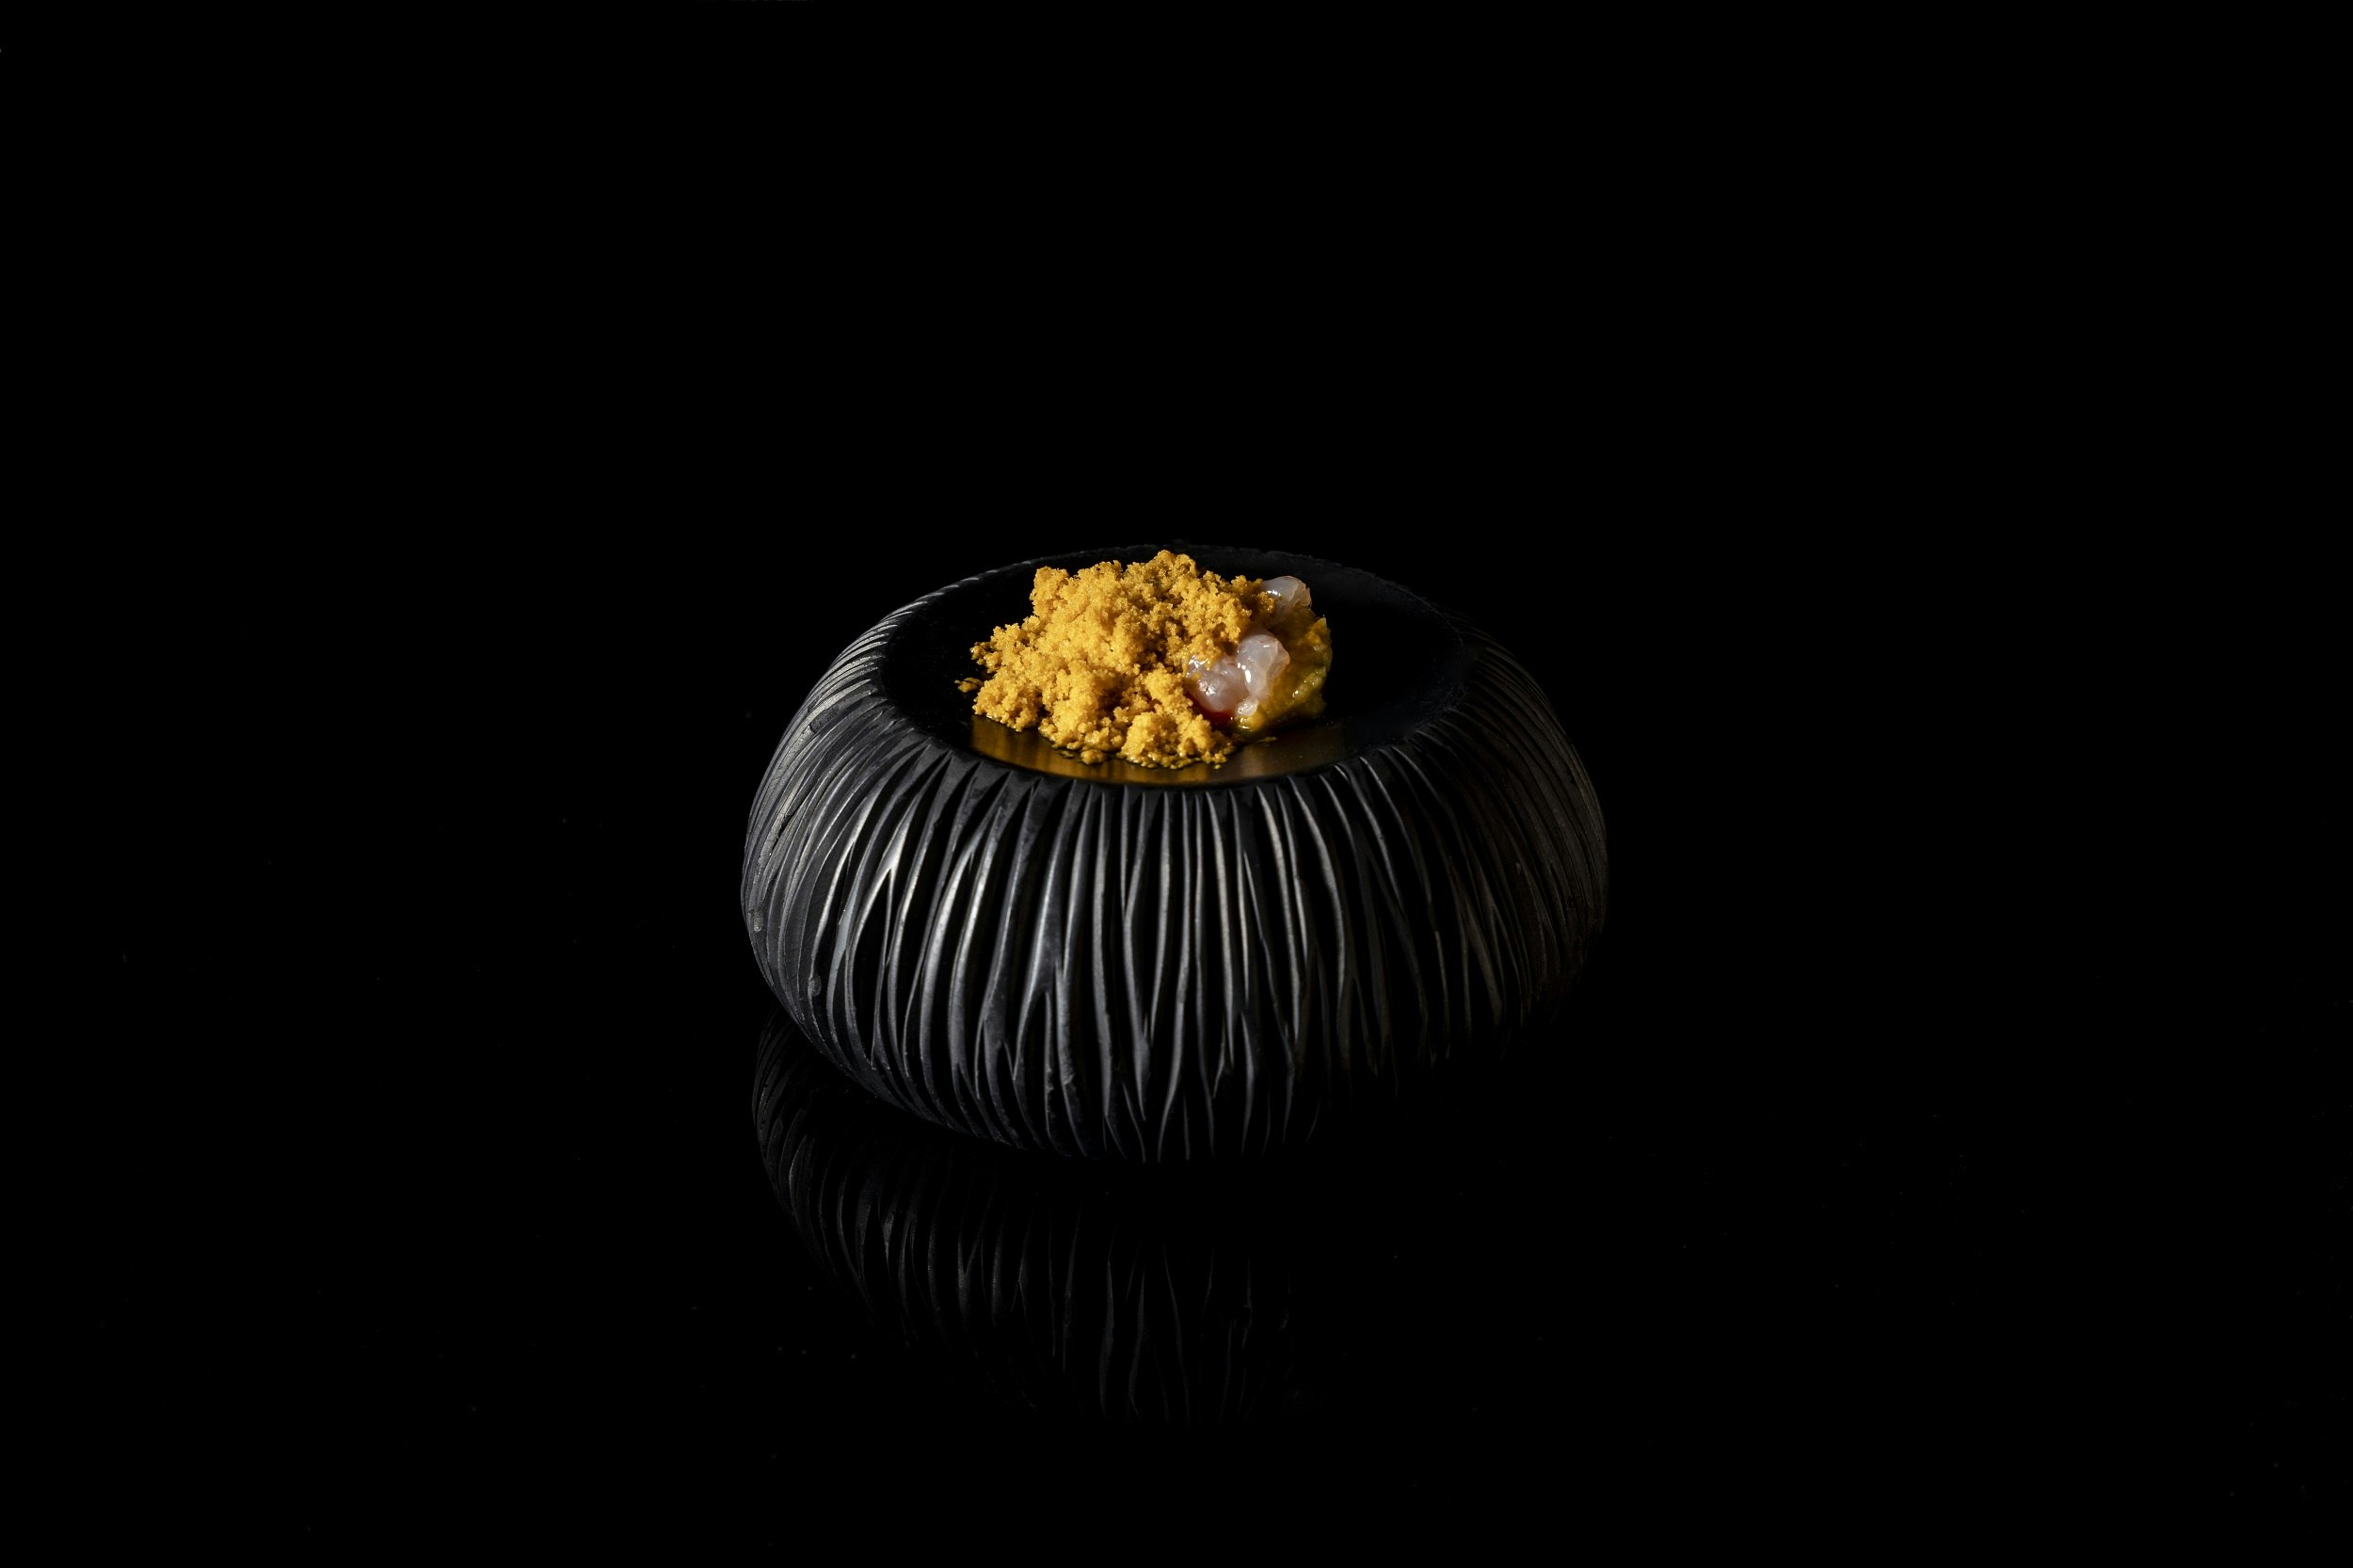 A thick black saucer, with hewn sides resembling the sides of a volcano, holds a delicate serving of a tumeric-coloured dish.